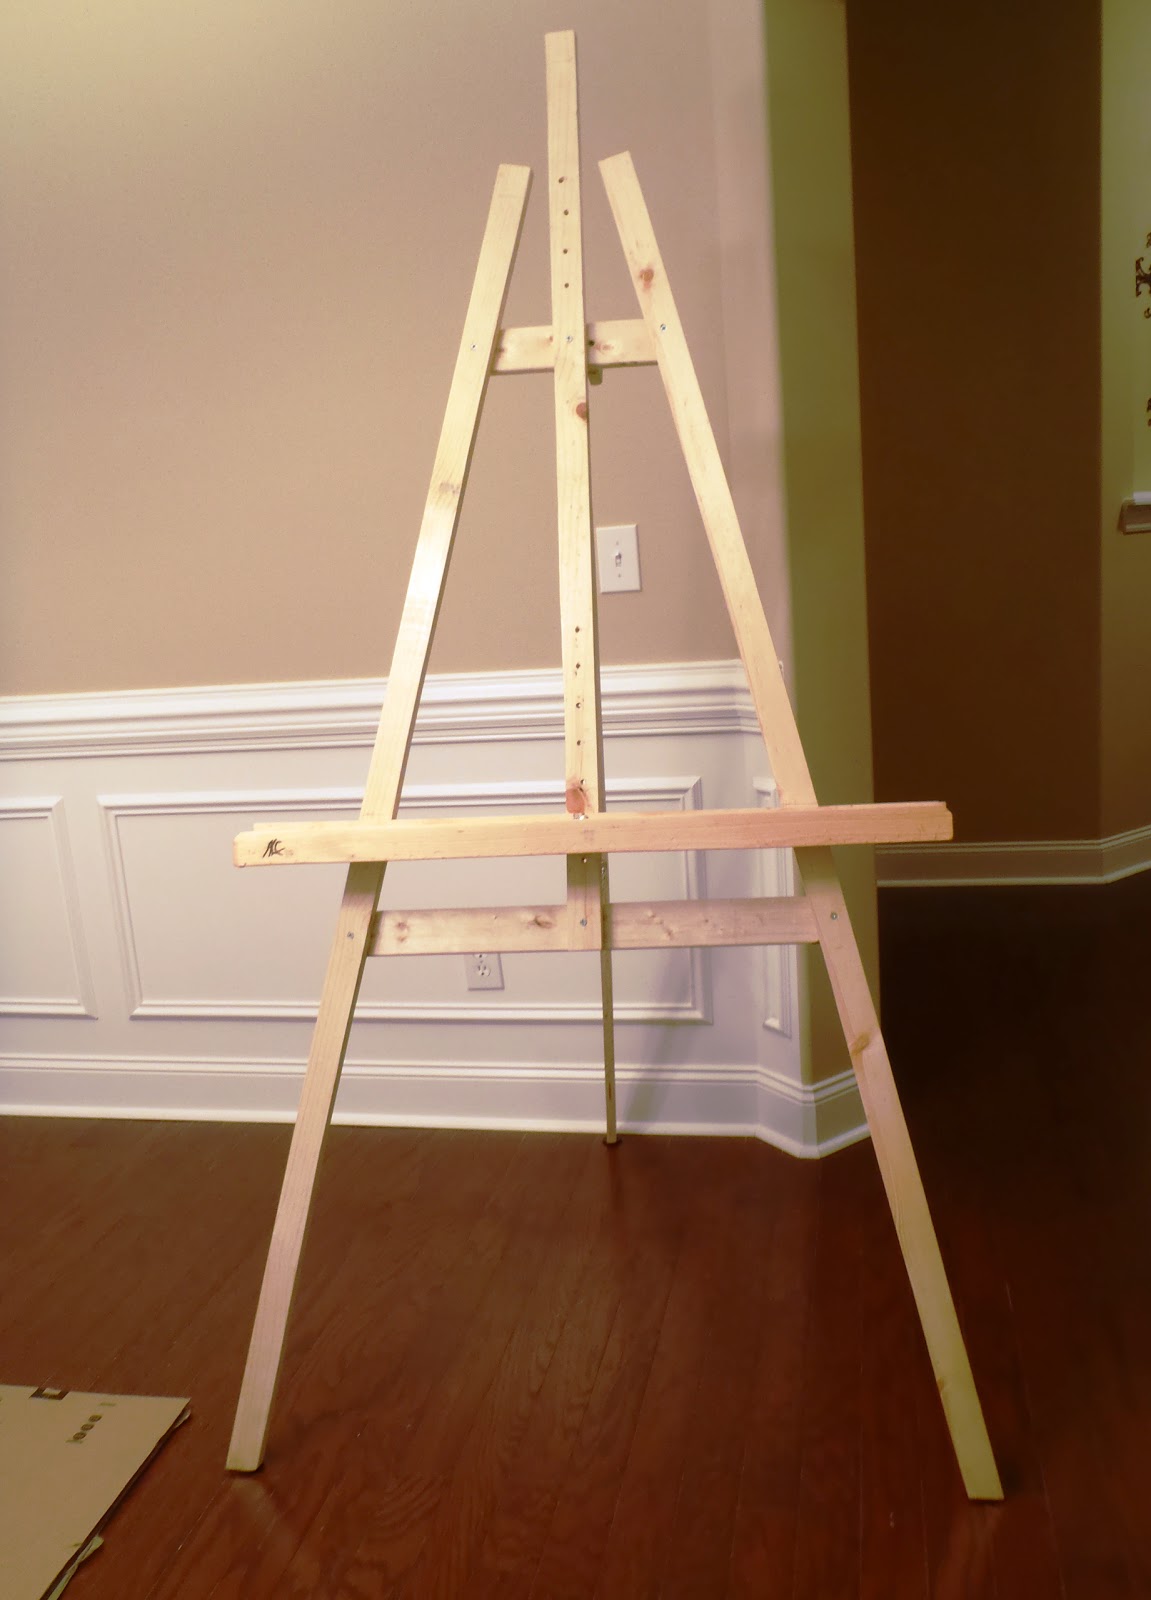 How to Set Up an Artist Easel